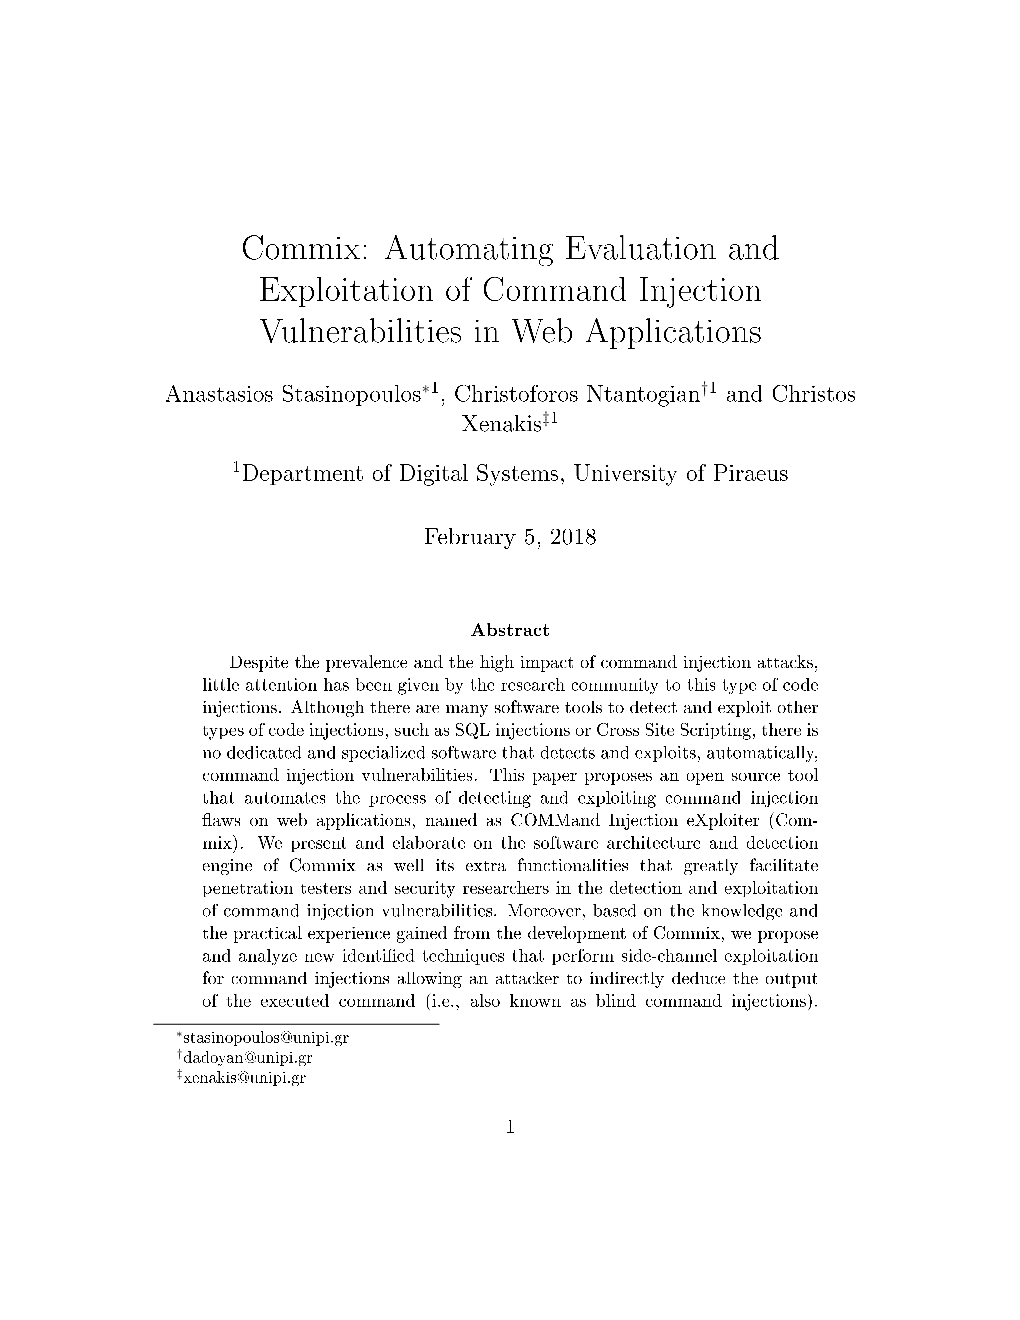 Commix: Automating Evaluation and Exploitation of Command Injection Vulnerabilities in Web Applications